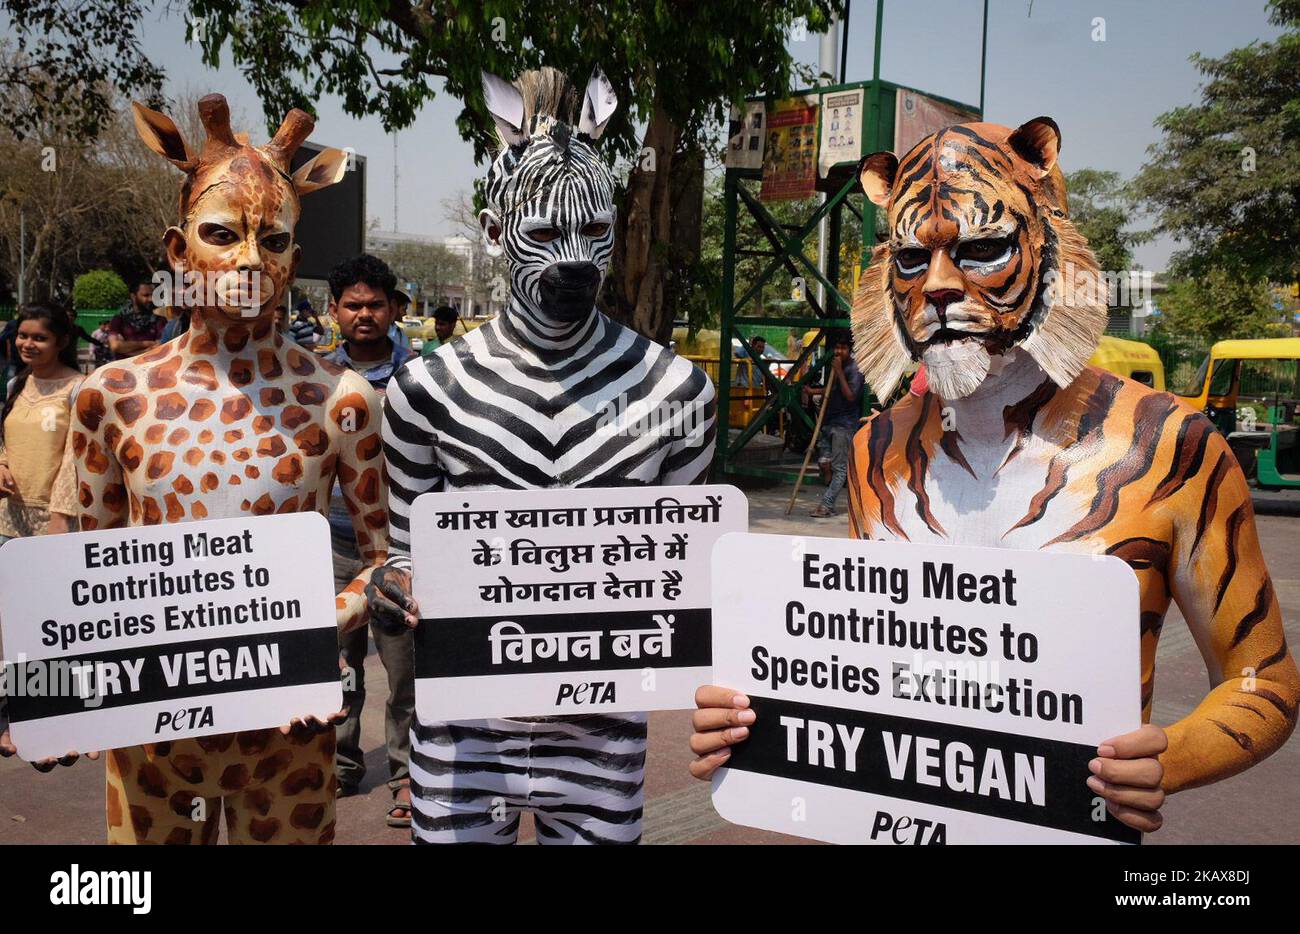 people-for-the-ethical-treatment-of-animals-peta-members-body-painted-as-a-tiger-zebra-and-giraffe-stand-with-signs-promoting-vegan-eating-ahead-of-international-day-of-forests-in-new-delhi-on-march-20-2018-peta-india-activists-gathered-to-alert-people-that-eating-meat-contributes-to-species-extinction-and-urge-people-to-turn-vegan-for-environmental-protection-photo-by-sahiba-chawdharynurphoto-2KAX8DJ.jpg